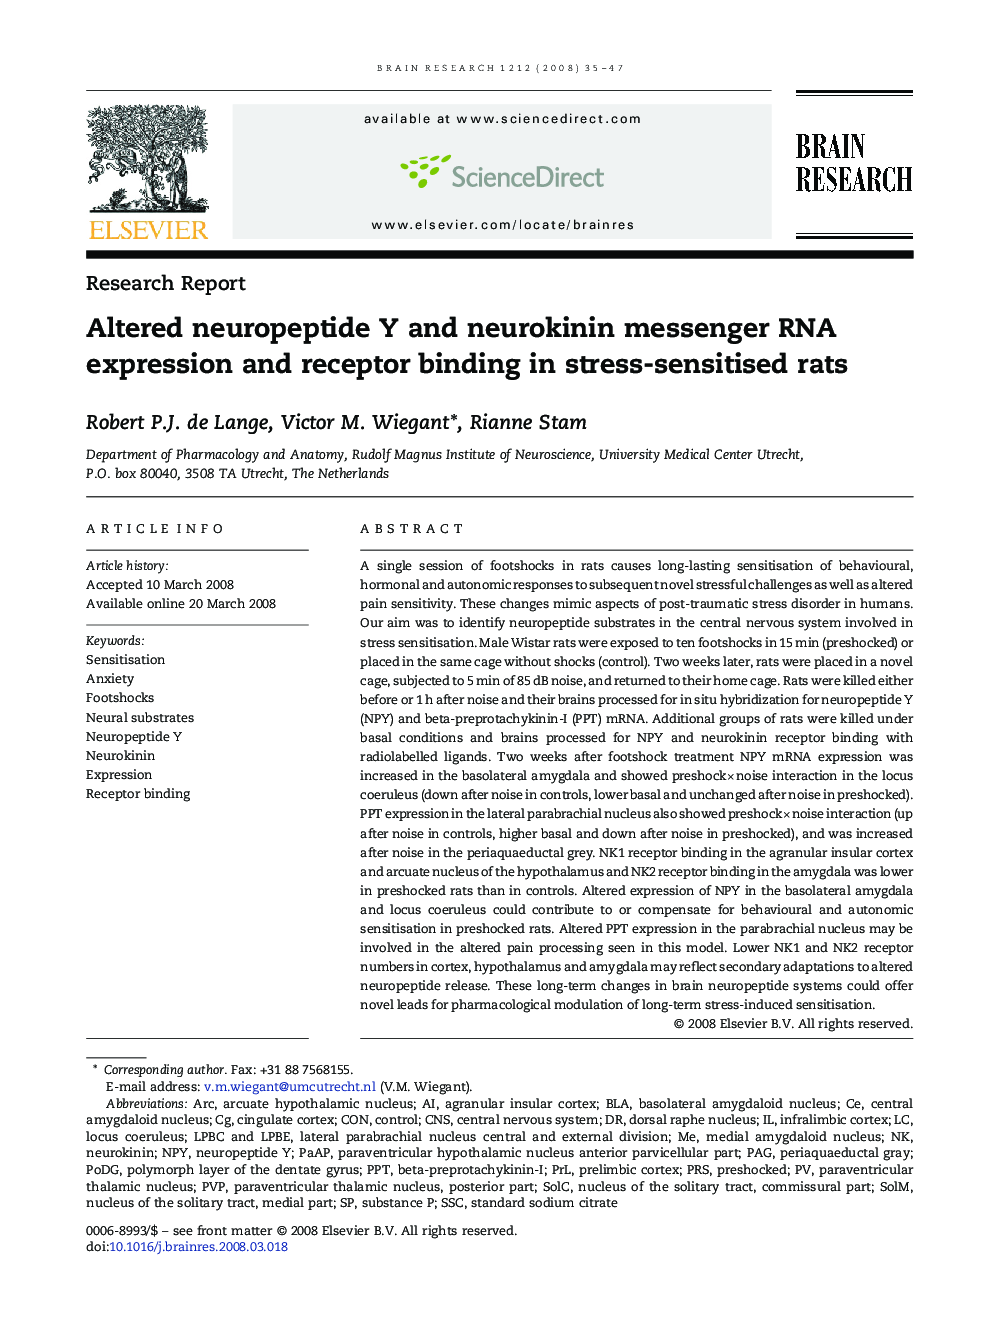 Altered neuropeptide Y and neurokinin messenger RNA expression and receptor binding in stress-sensitised rats